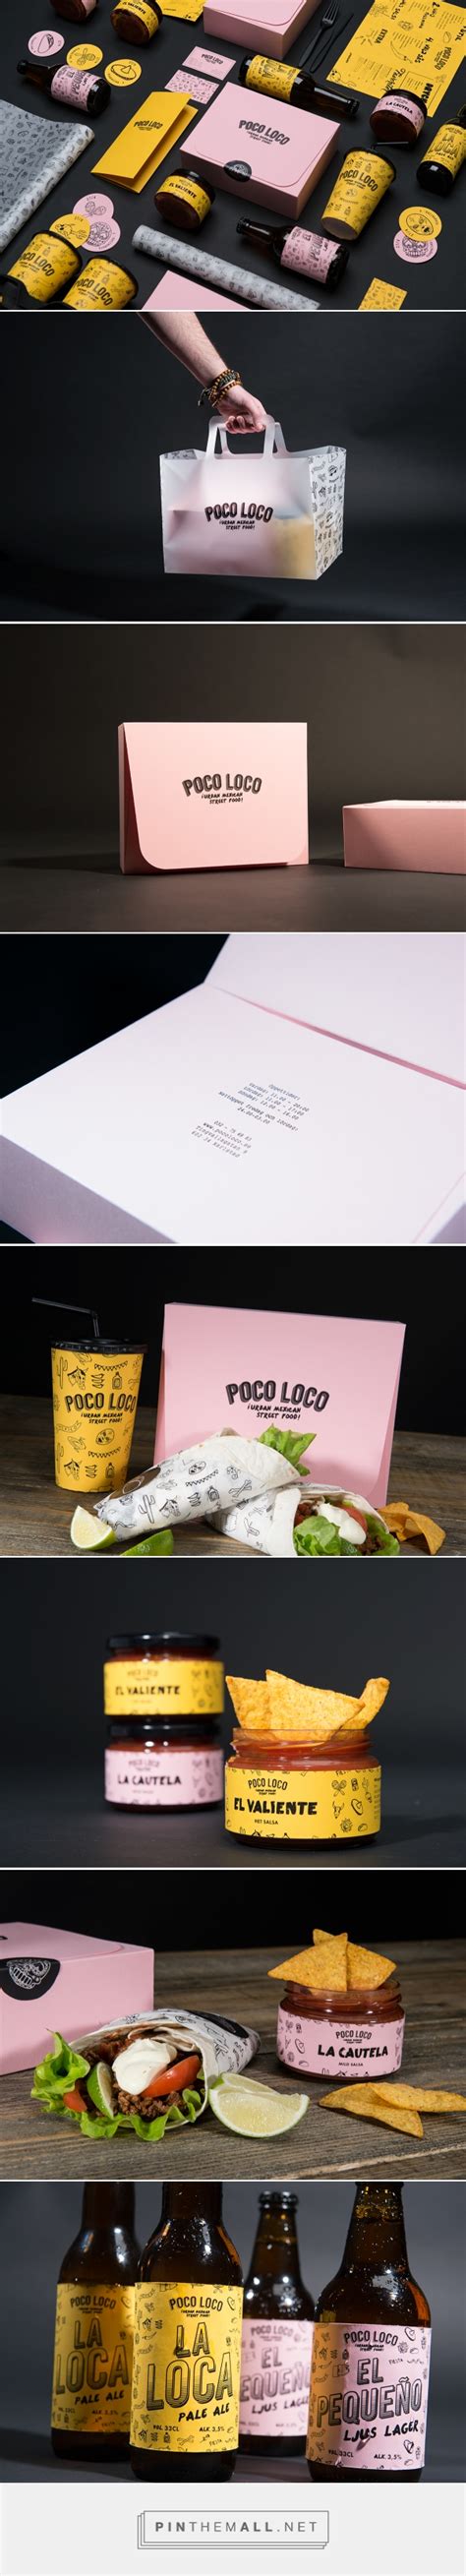 Poco Loco Rebranding And Packaging Project On Behance A Grouped